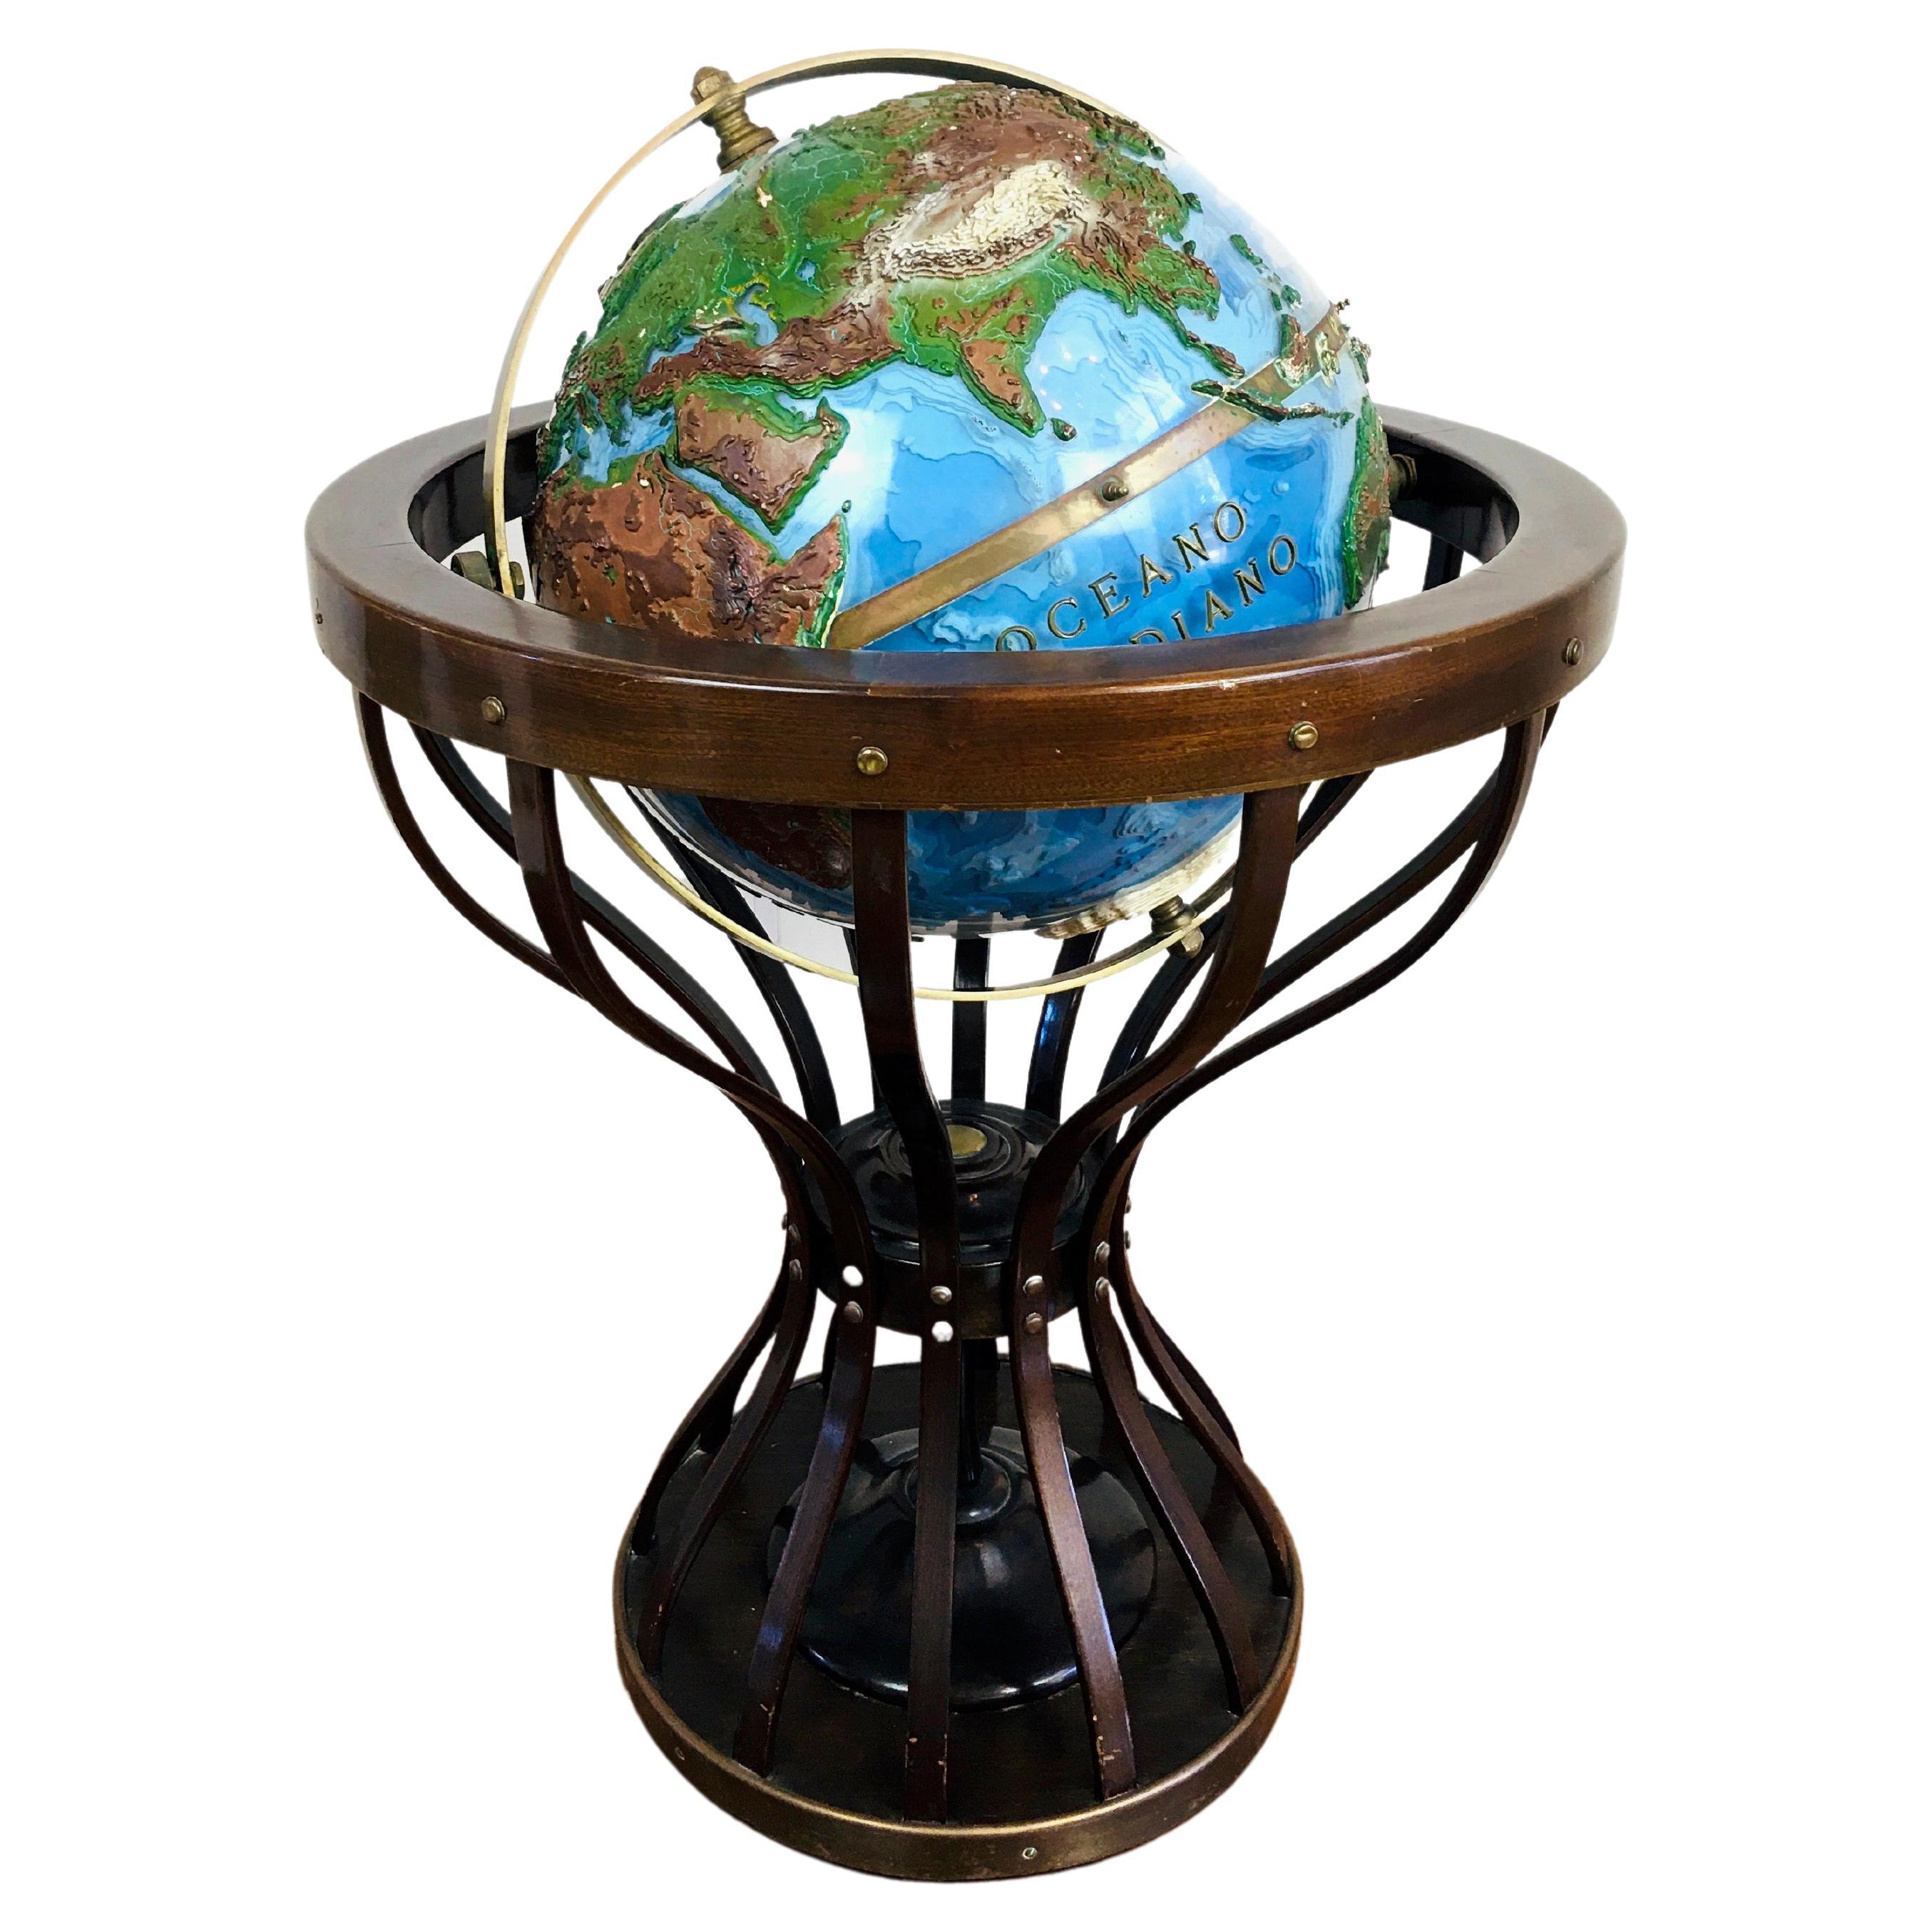 Monumental Edward Wormley Style Exaggerated Relief Standing World Globe